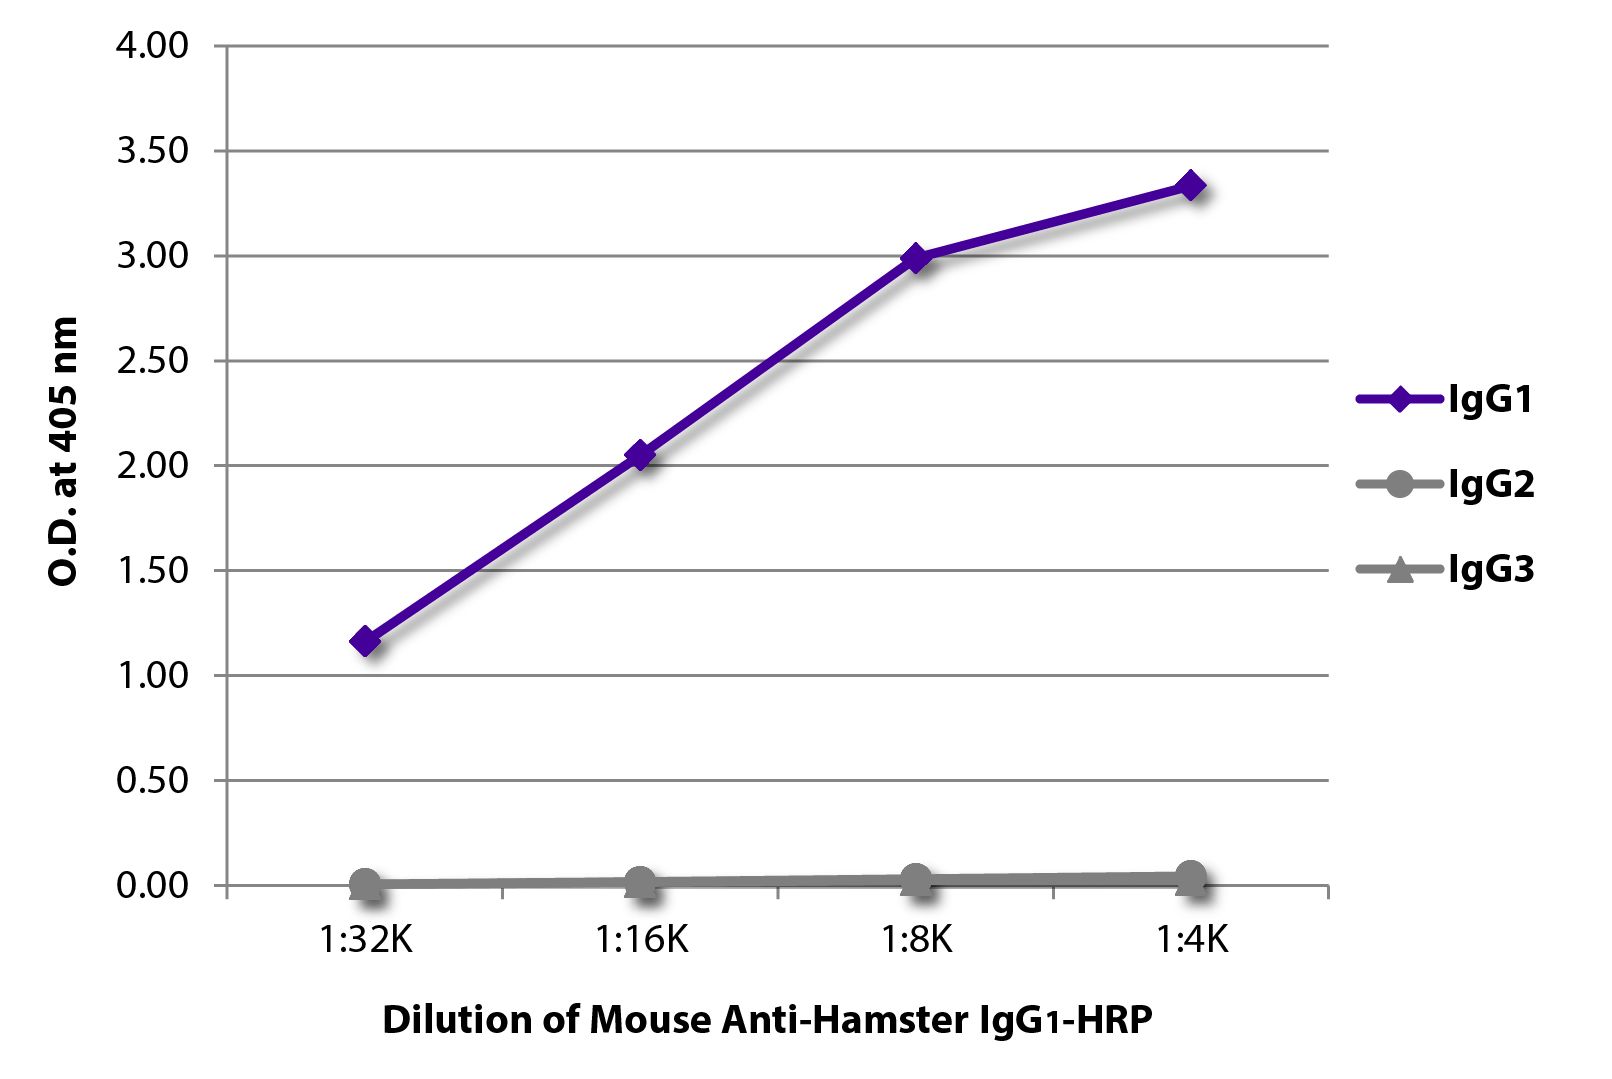 ELISA plate was coated with purified hamster IgG<sub>1</sub>, IgG<sub>2</sub>, and IgG<sub>3</sub>.  Immunoglobulins were detected with serially diluted Mouse Anti-Hamster IgG<sub>1</sub>-HRP (SB Cat. No. 1940-05).